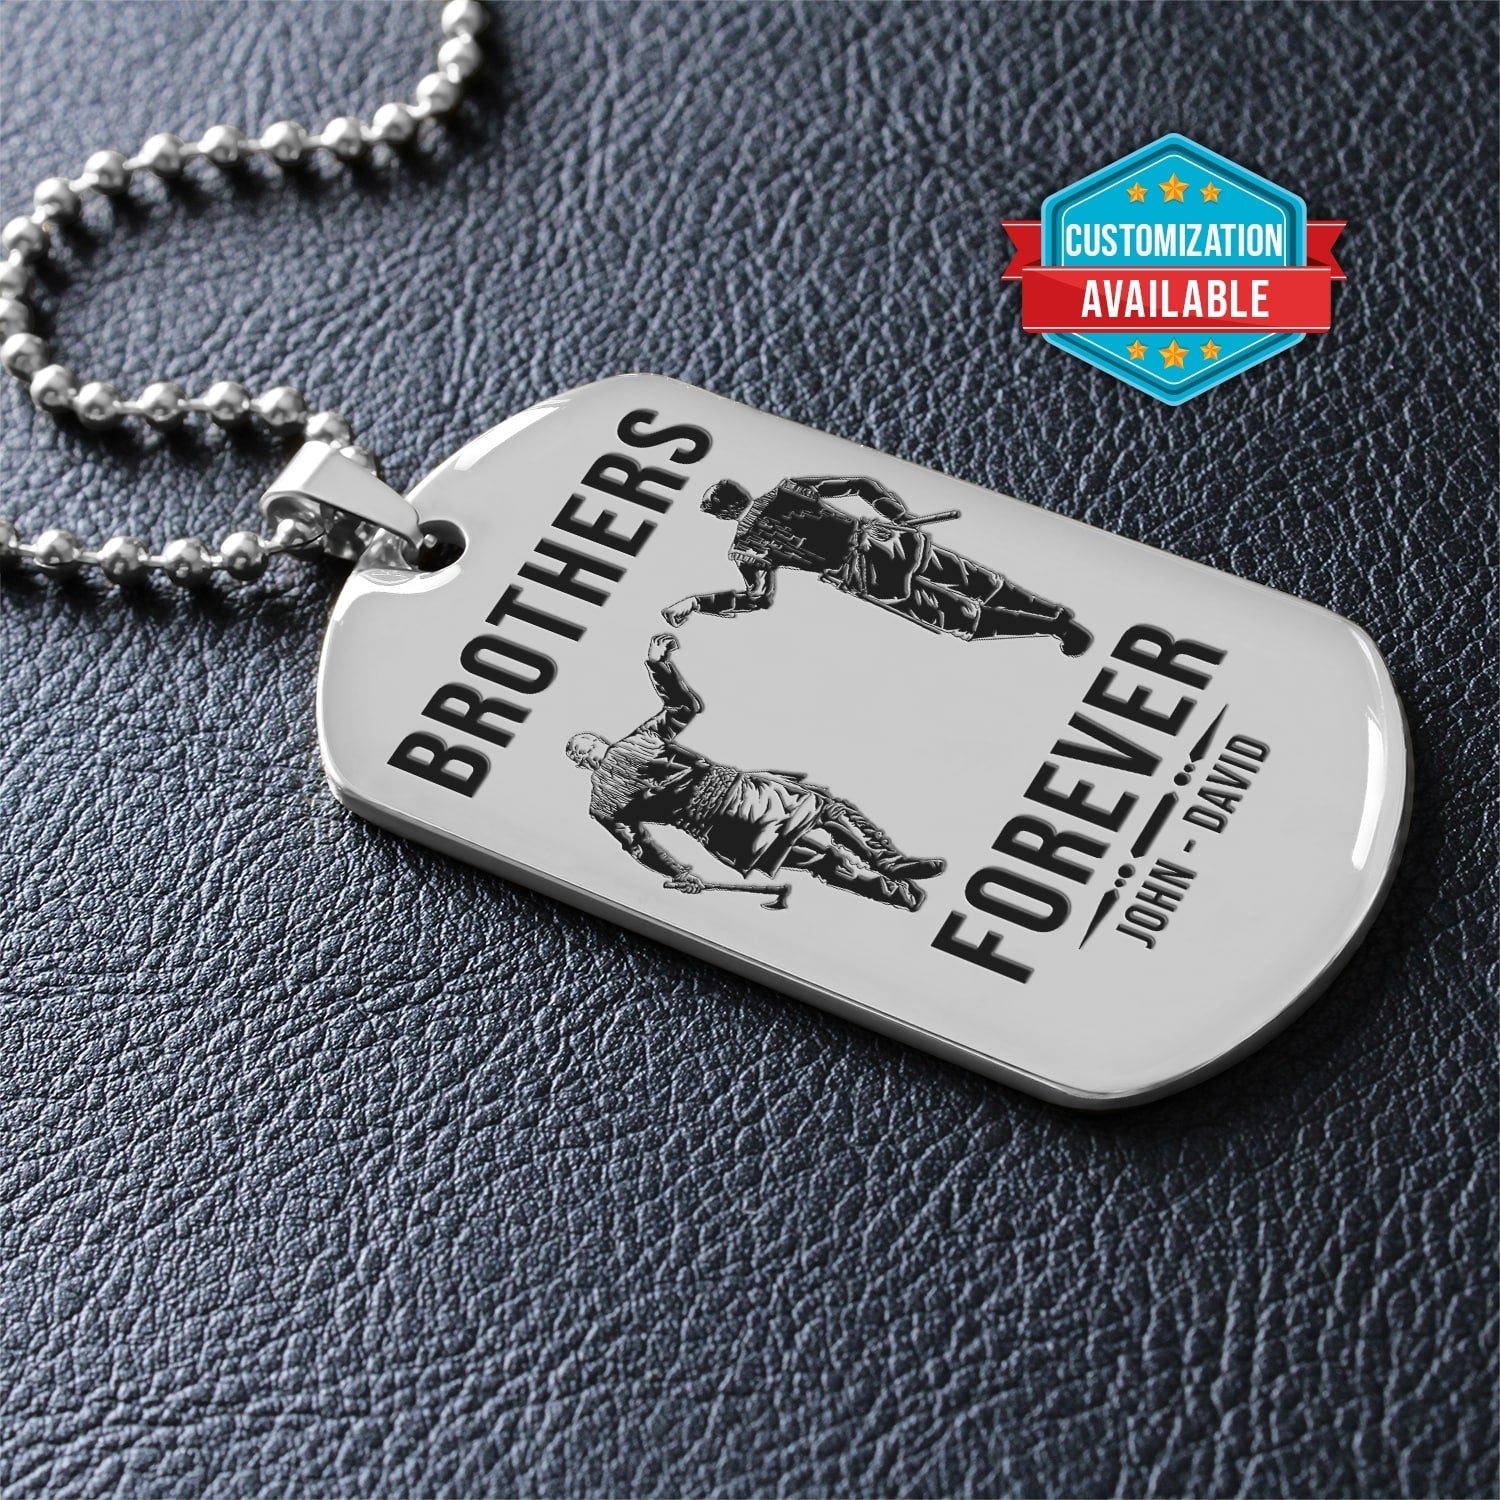 VKD026 - Brothers Forever - It's About Being Better Than You Were The Day Before - Ragnar Lothbrok - Floki - Vikings - Double Sided Engrave Silver Dog Tag